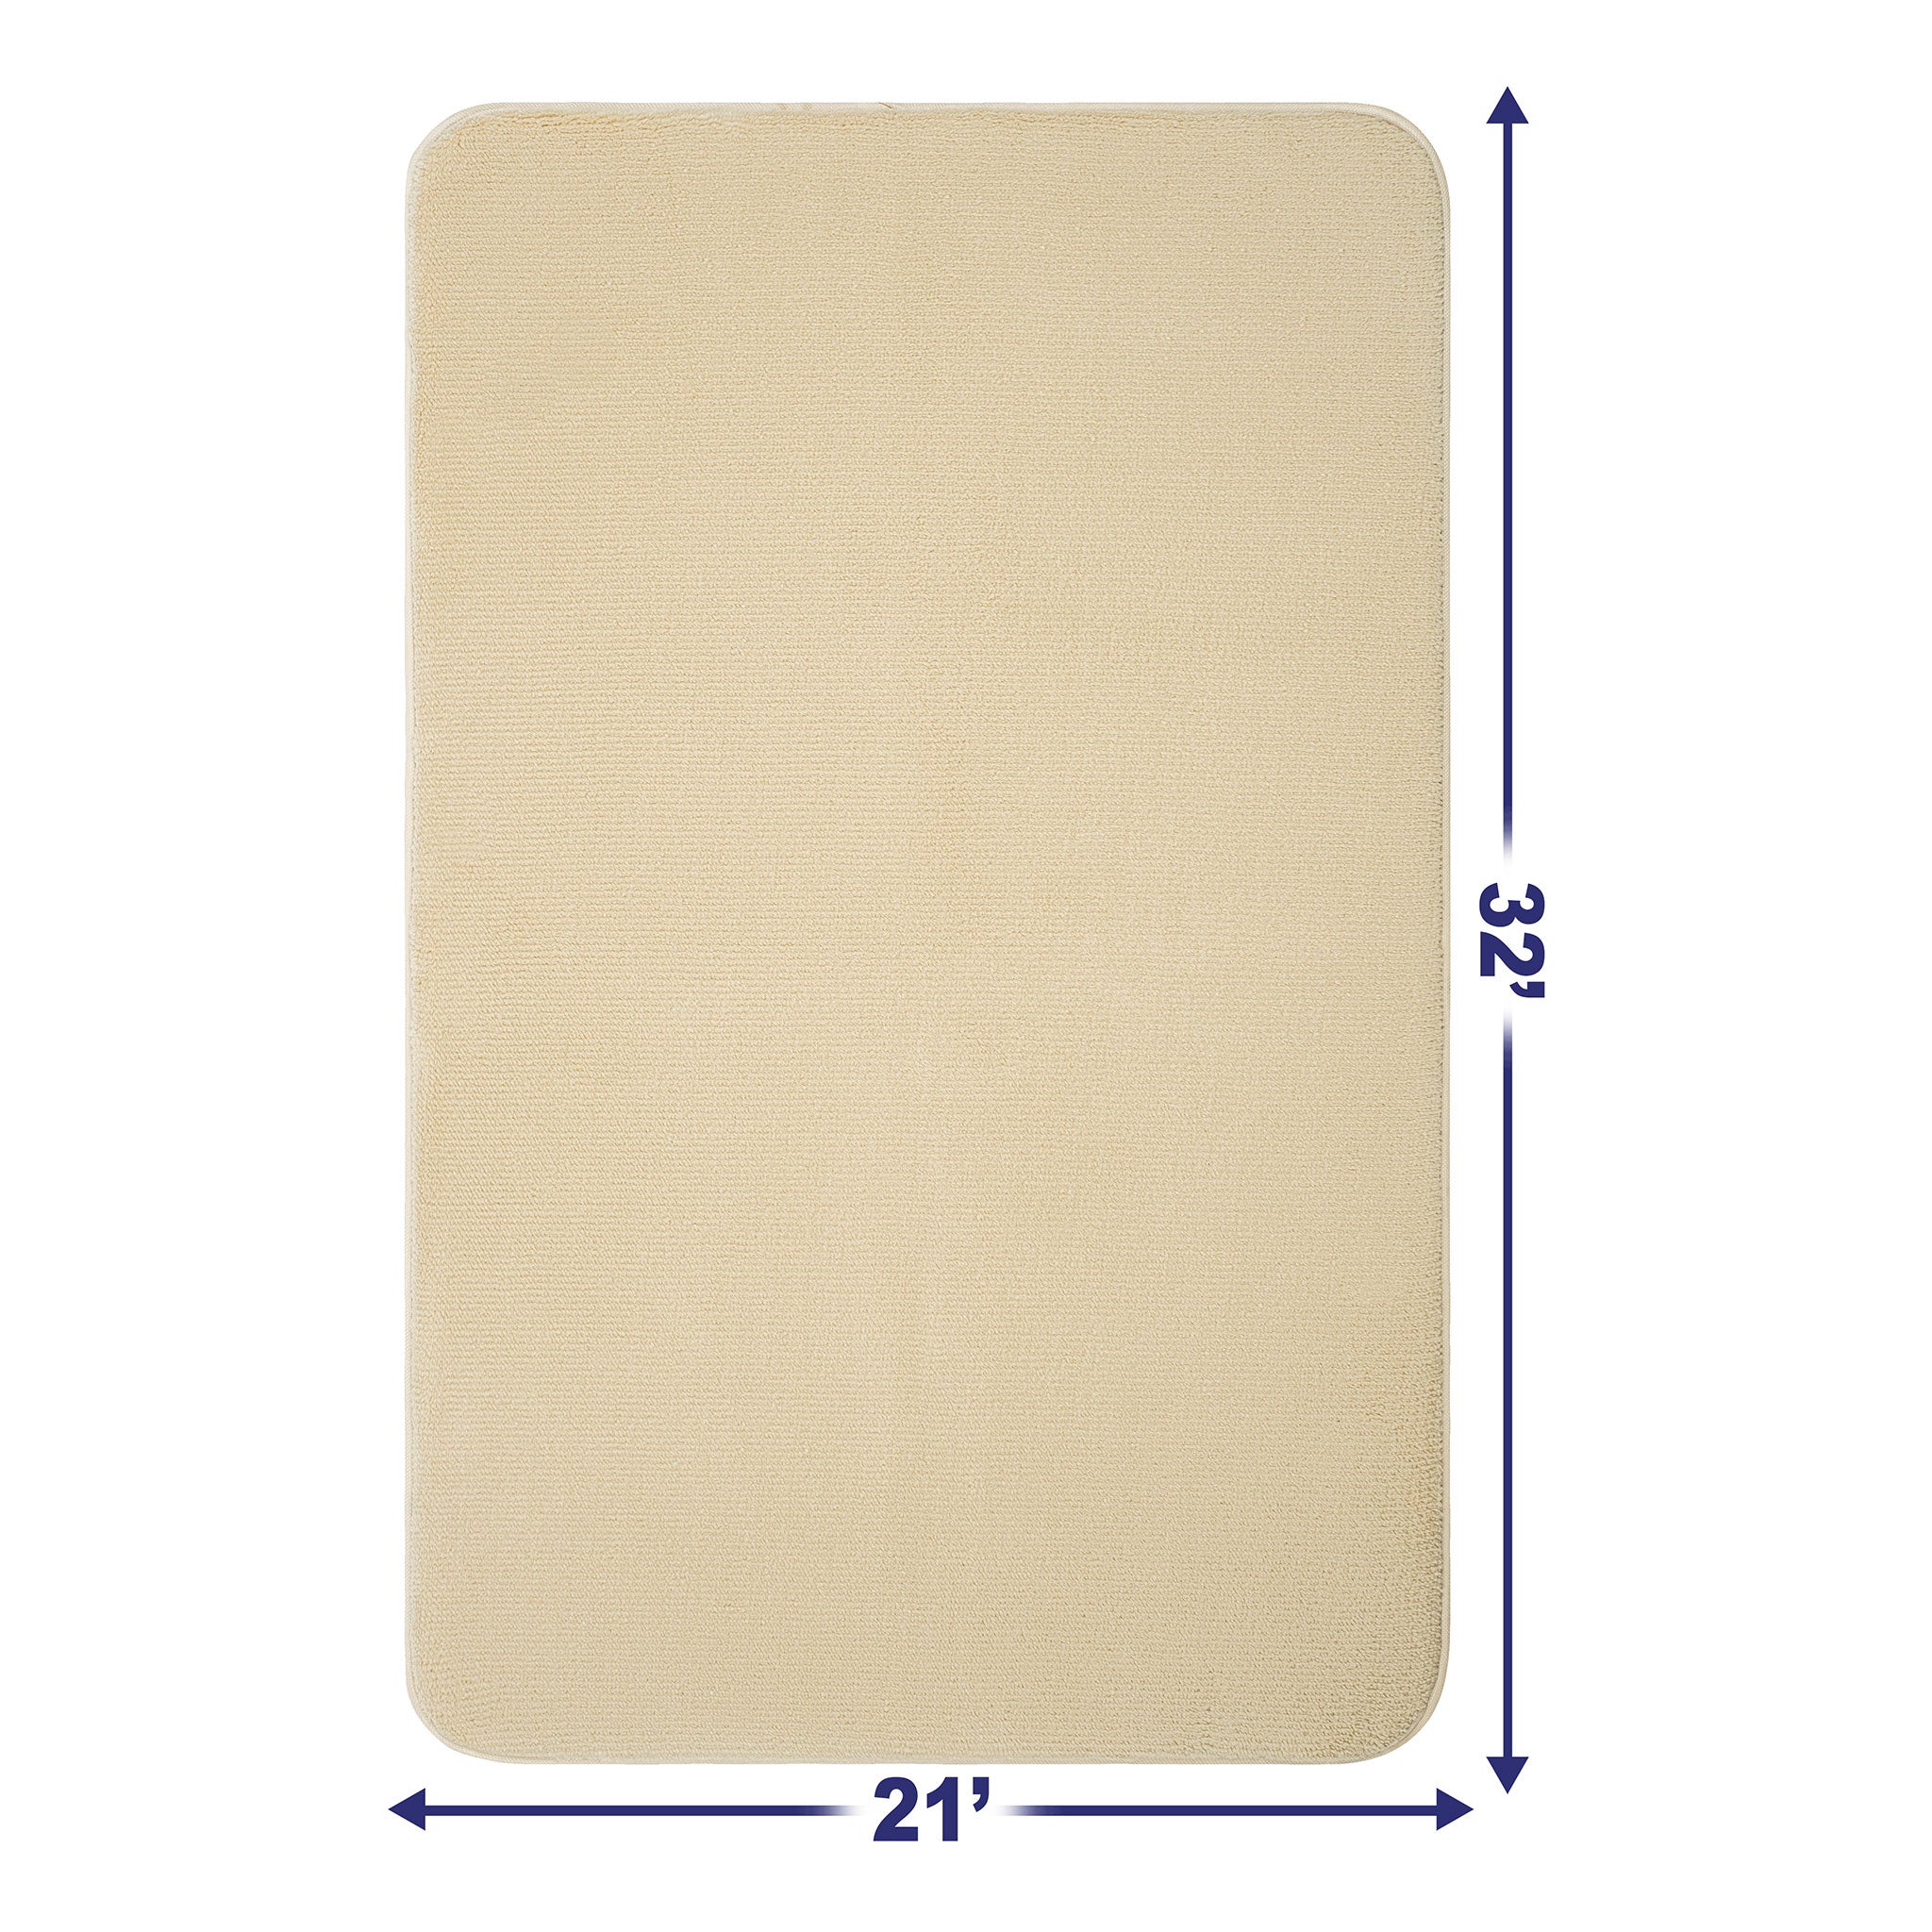 American Soft Linen - Fluffy Foamed Non-Slip Bath Rug 21x32 Inch -  18 Set Case Pack - Sand-Taupe - 3